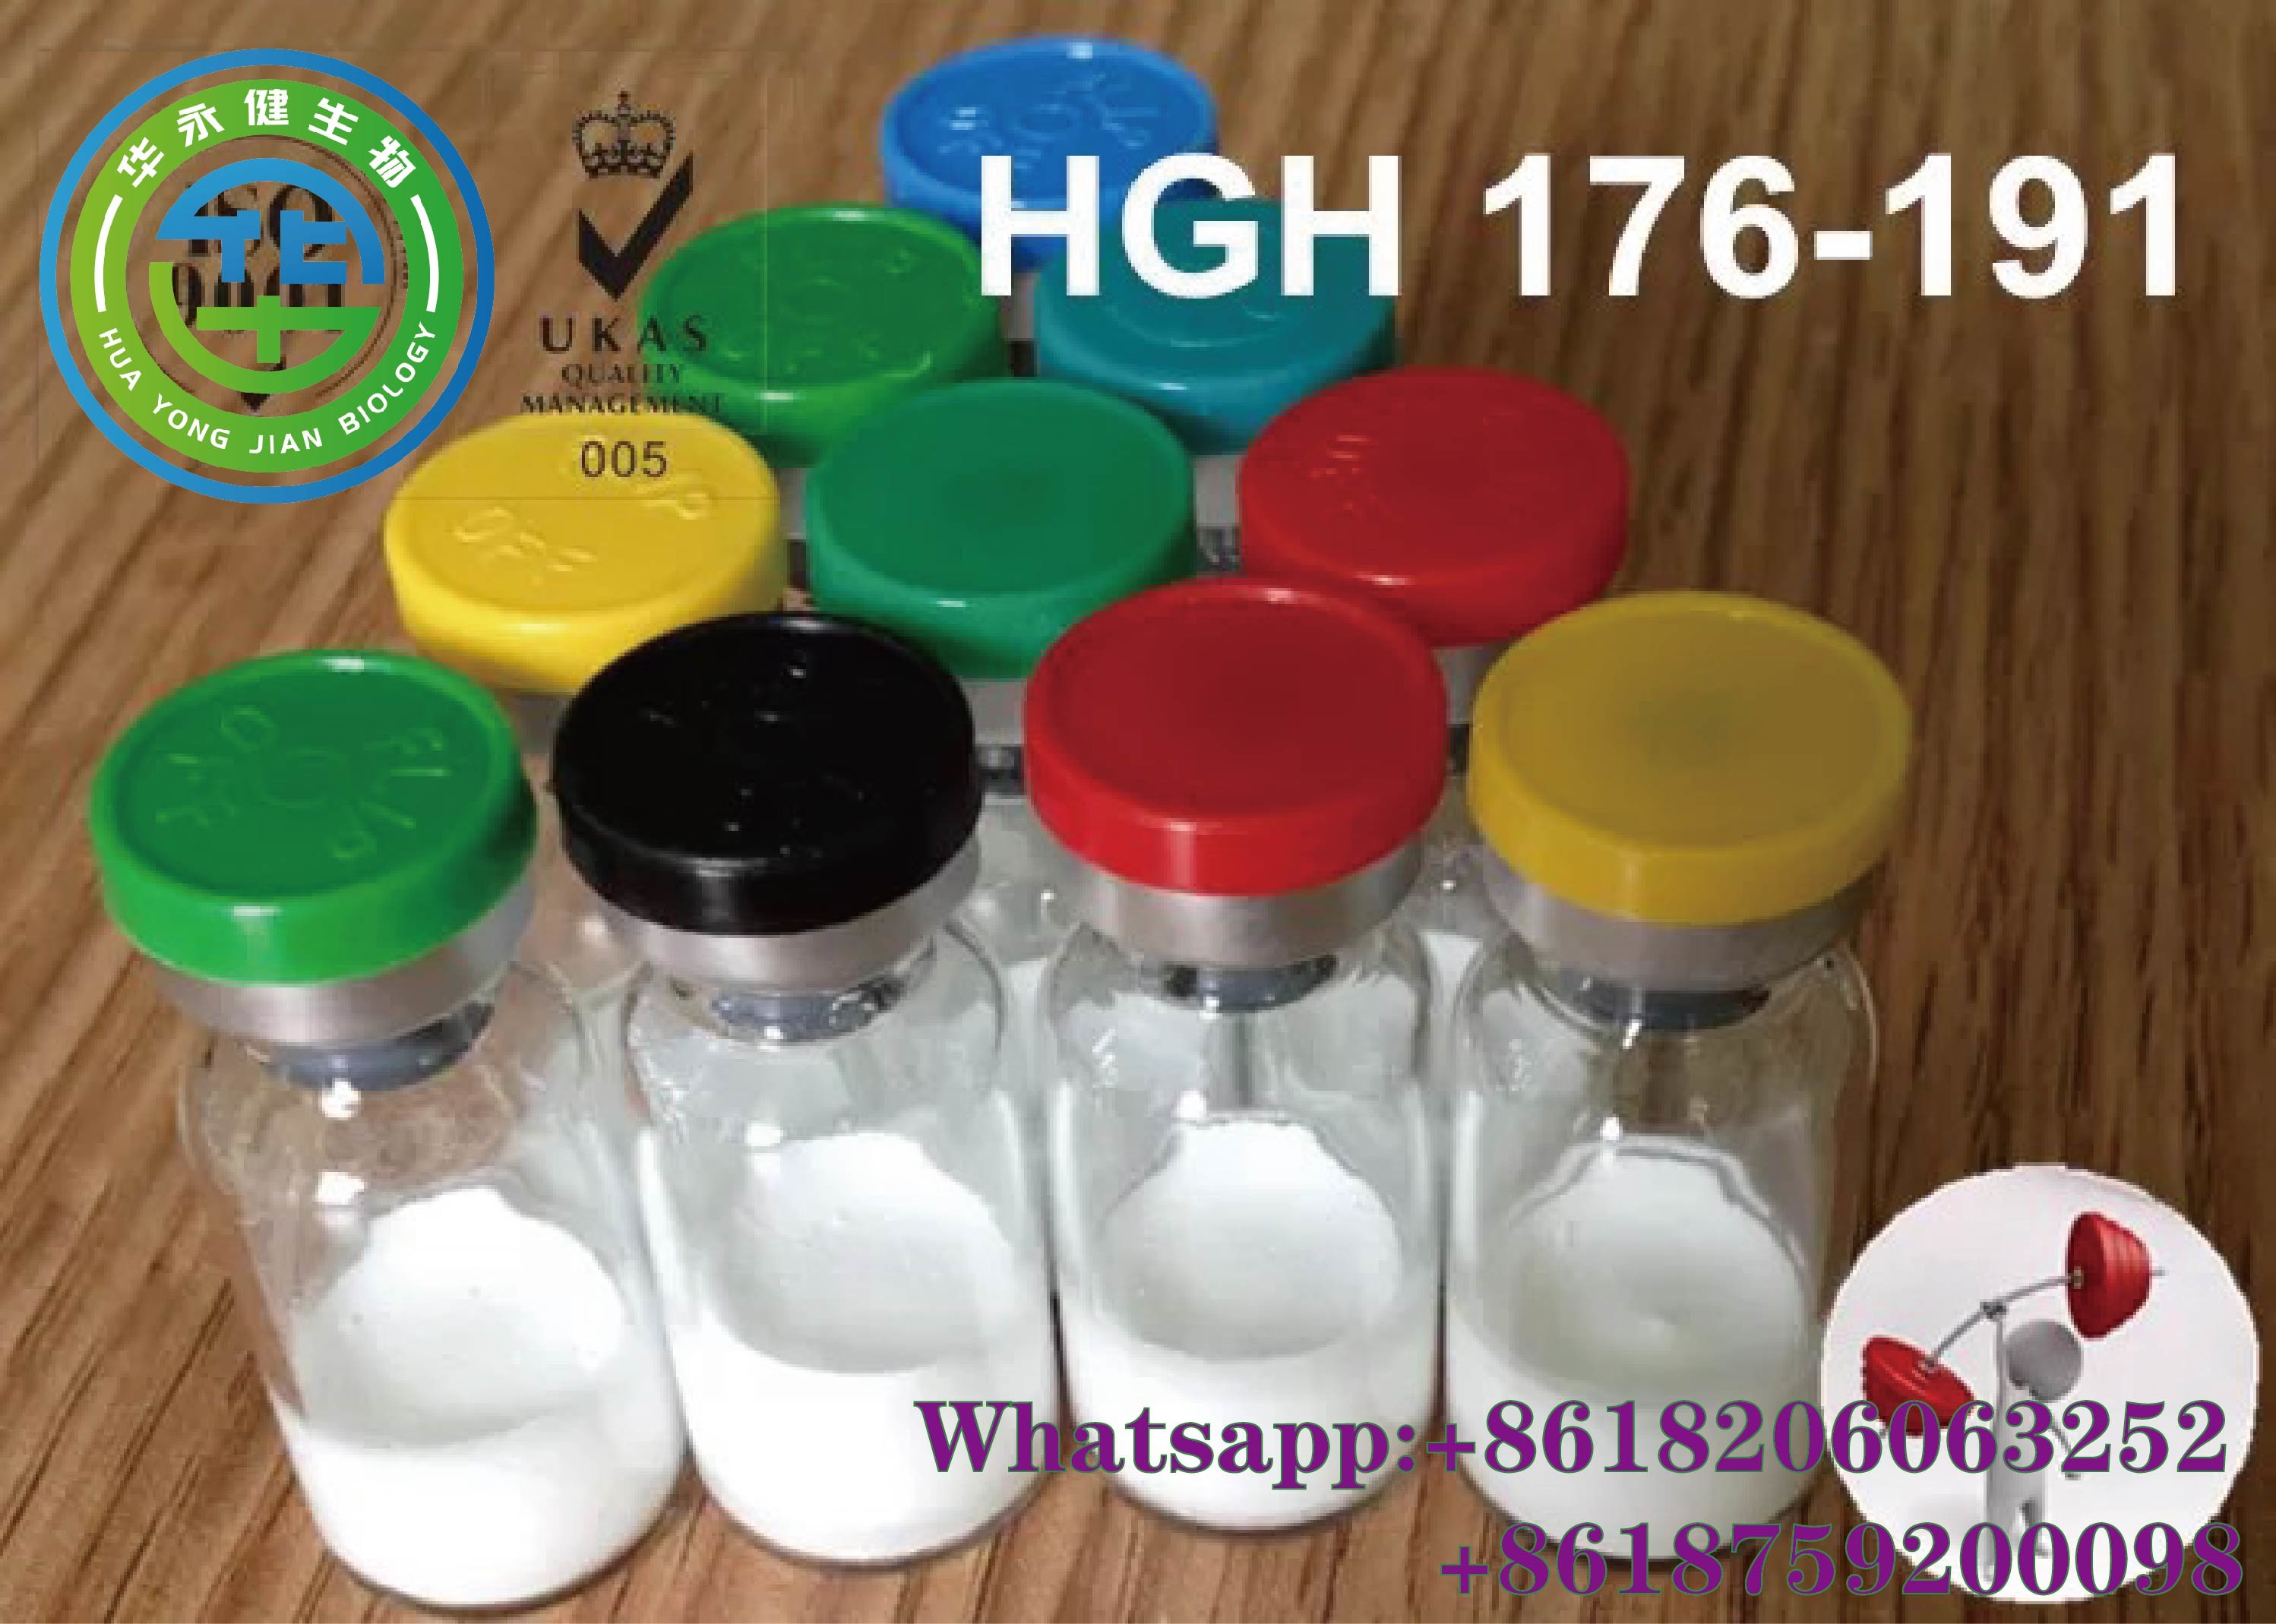 Wholesale hgh frag 176-191 fat loss cycle before and after bodybuilding human growth hormone Peptide from china suppliers